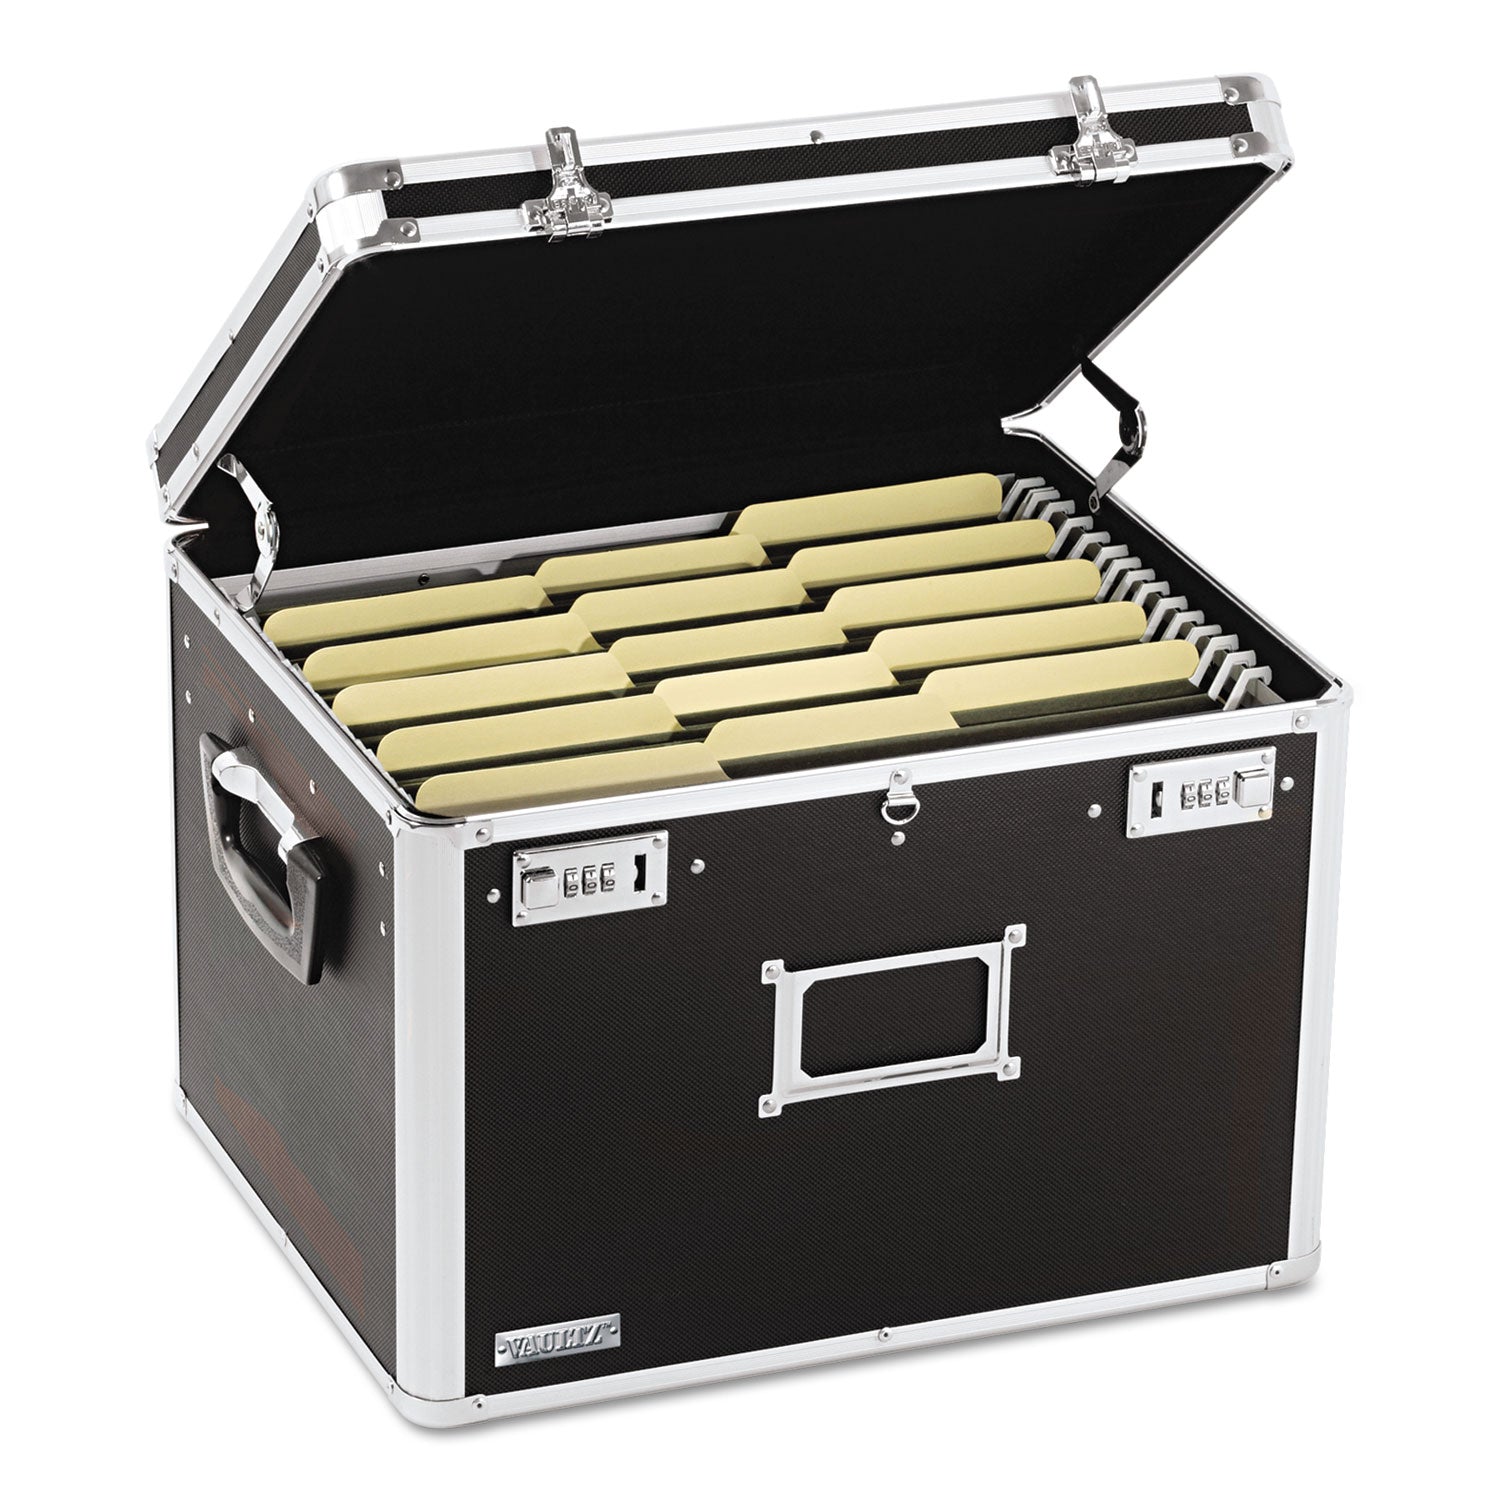 Locking File Chest with Adjustable File Rails, Letter/Legal Files, 17.5" x 14" x 12.5", Black - 